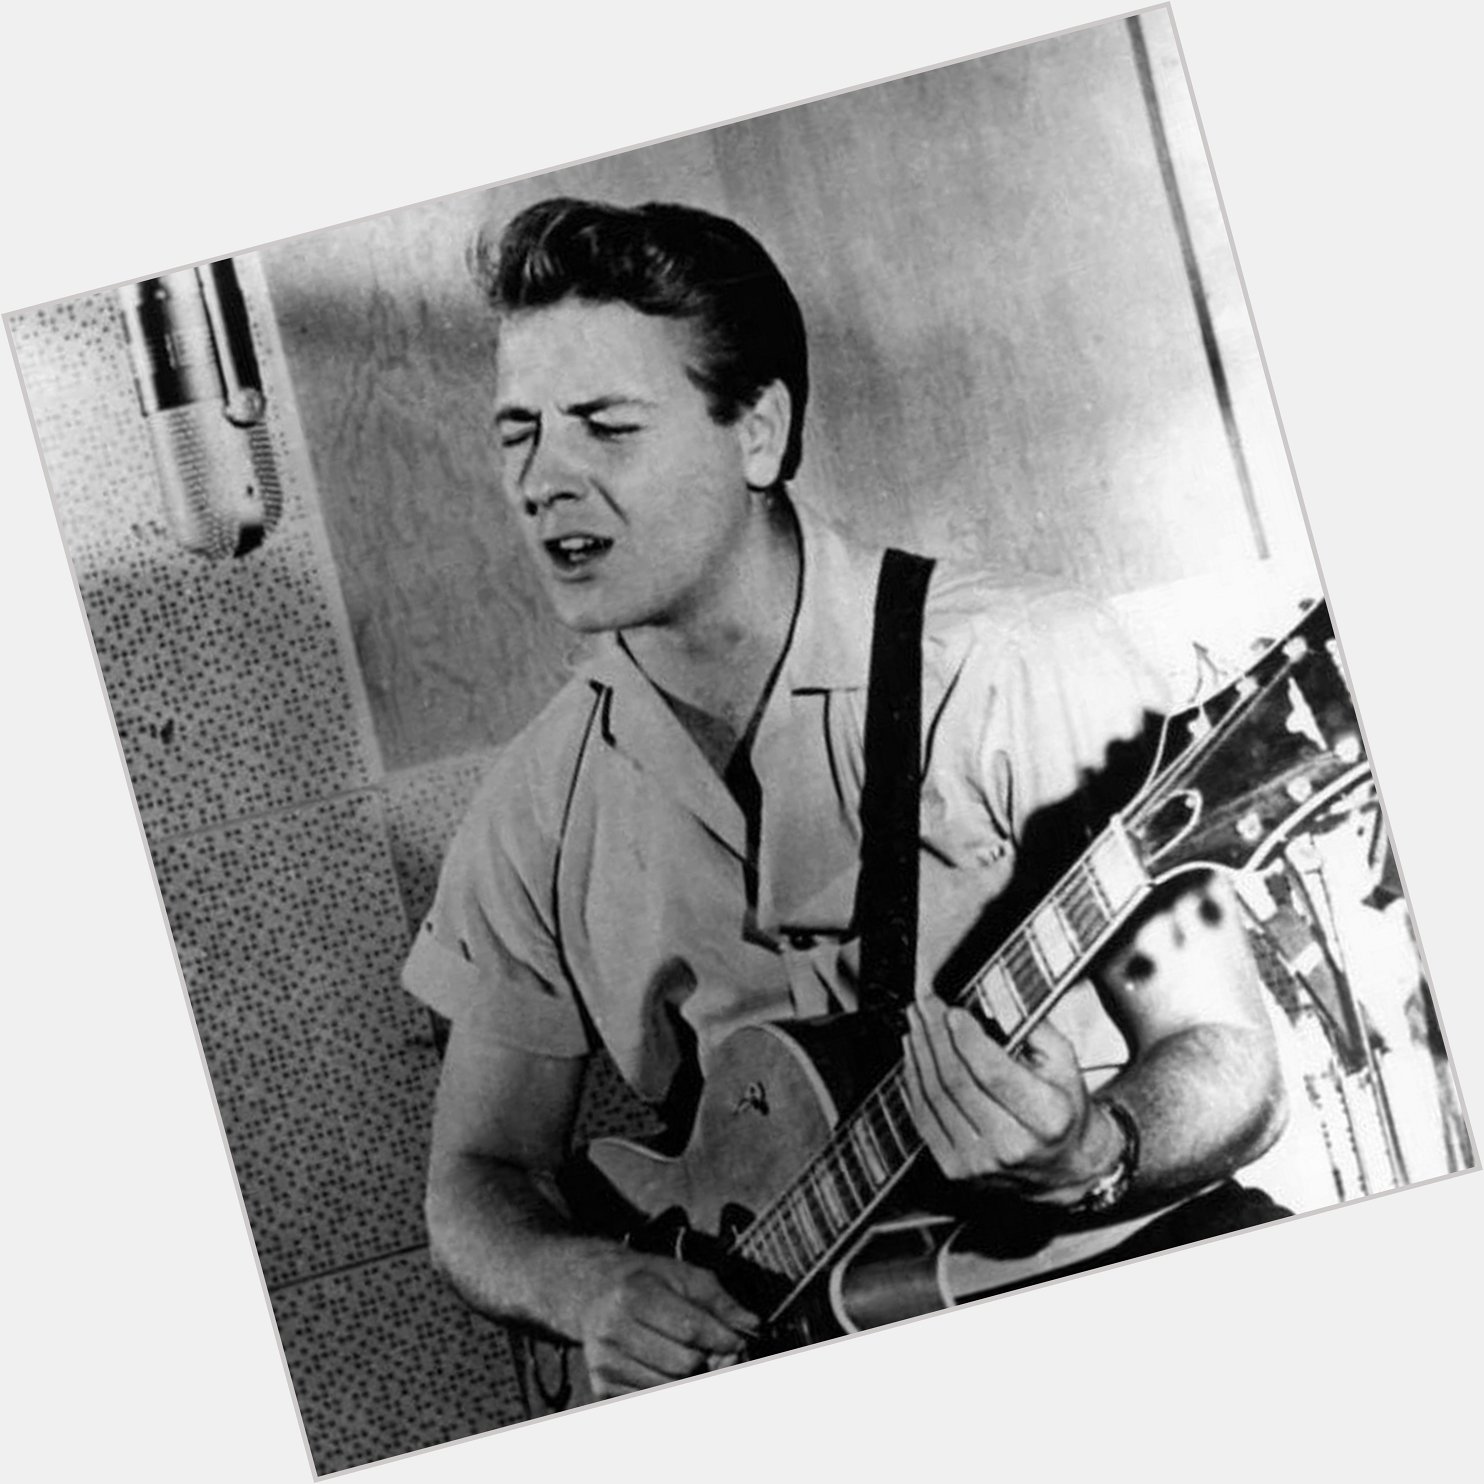 Happy Birthday to Mr Eddie Cochran

Thanks for the music!

From Carl  